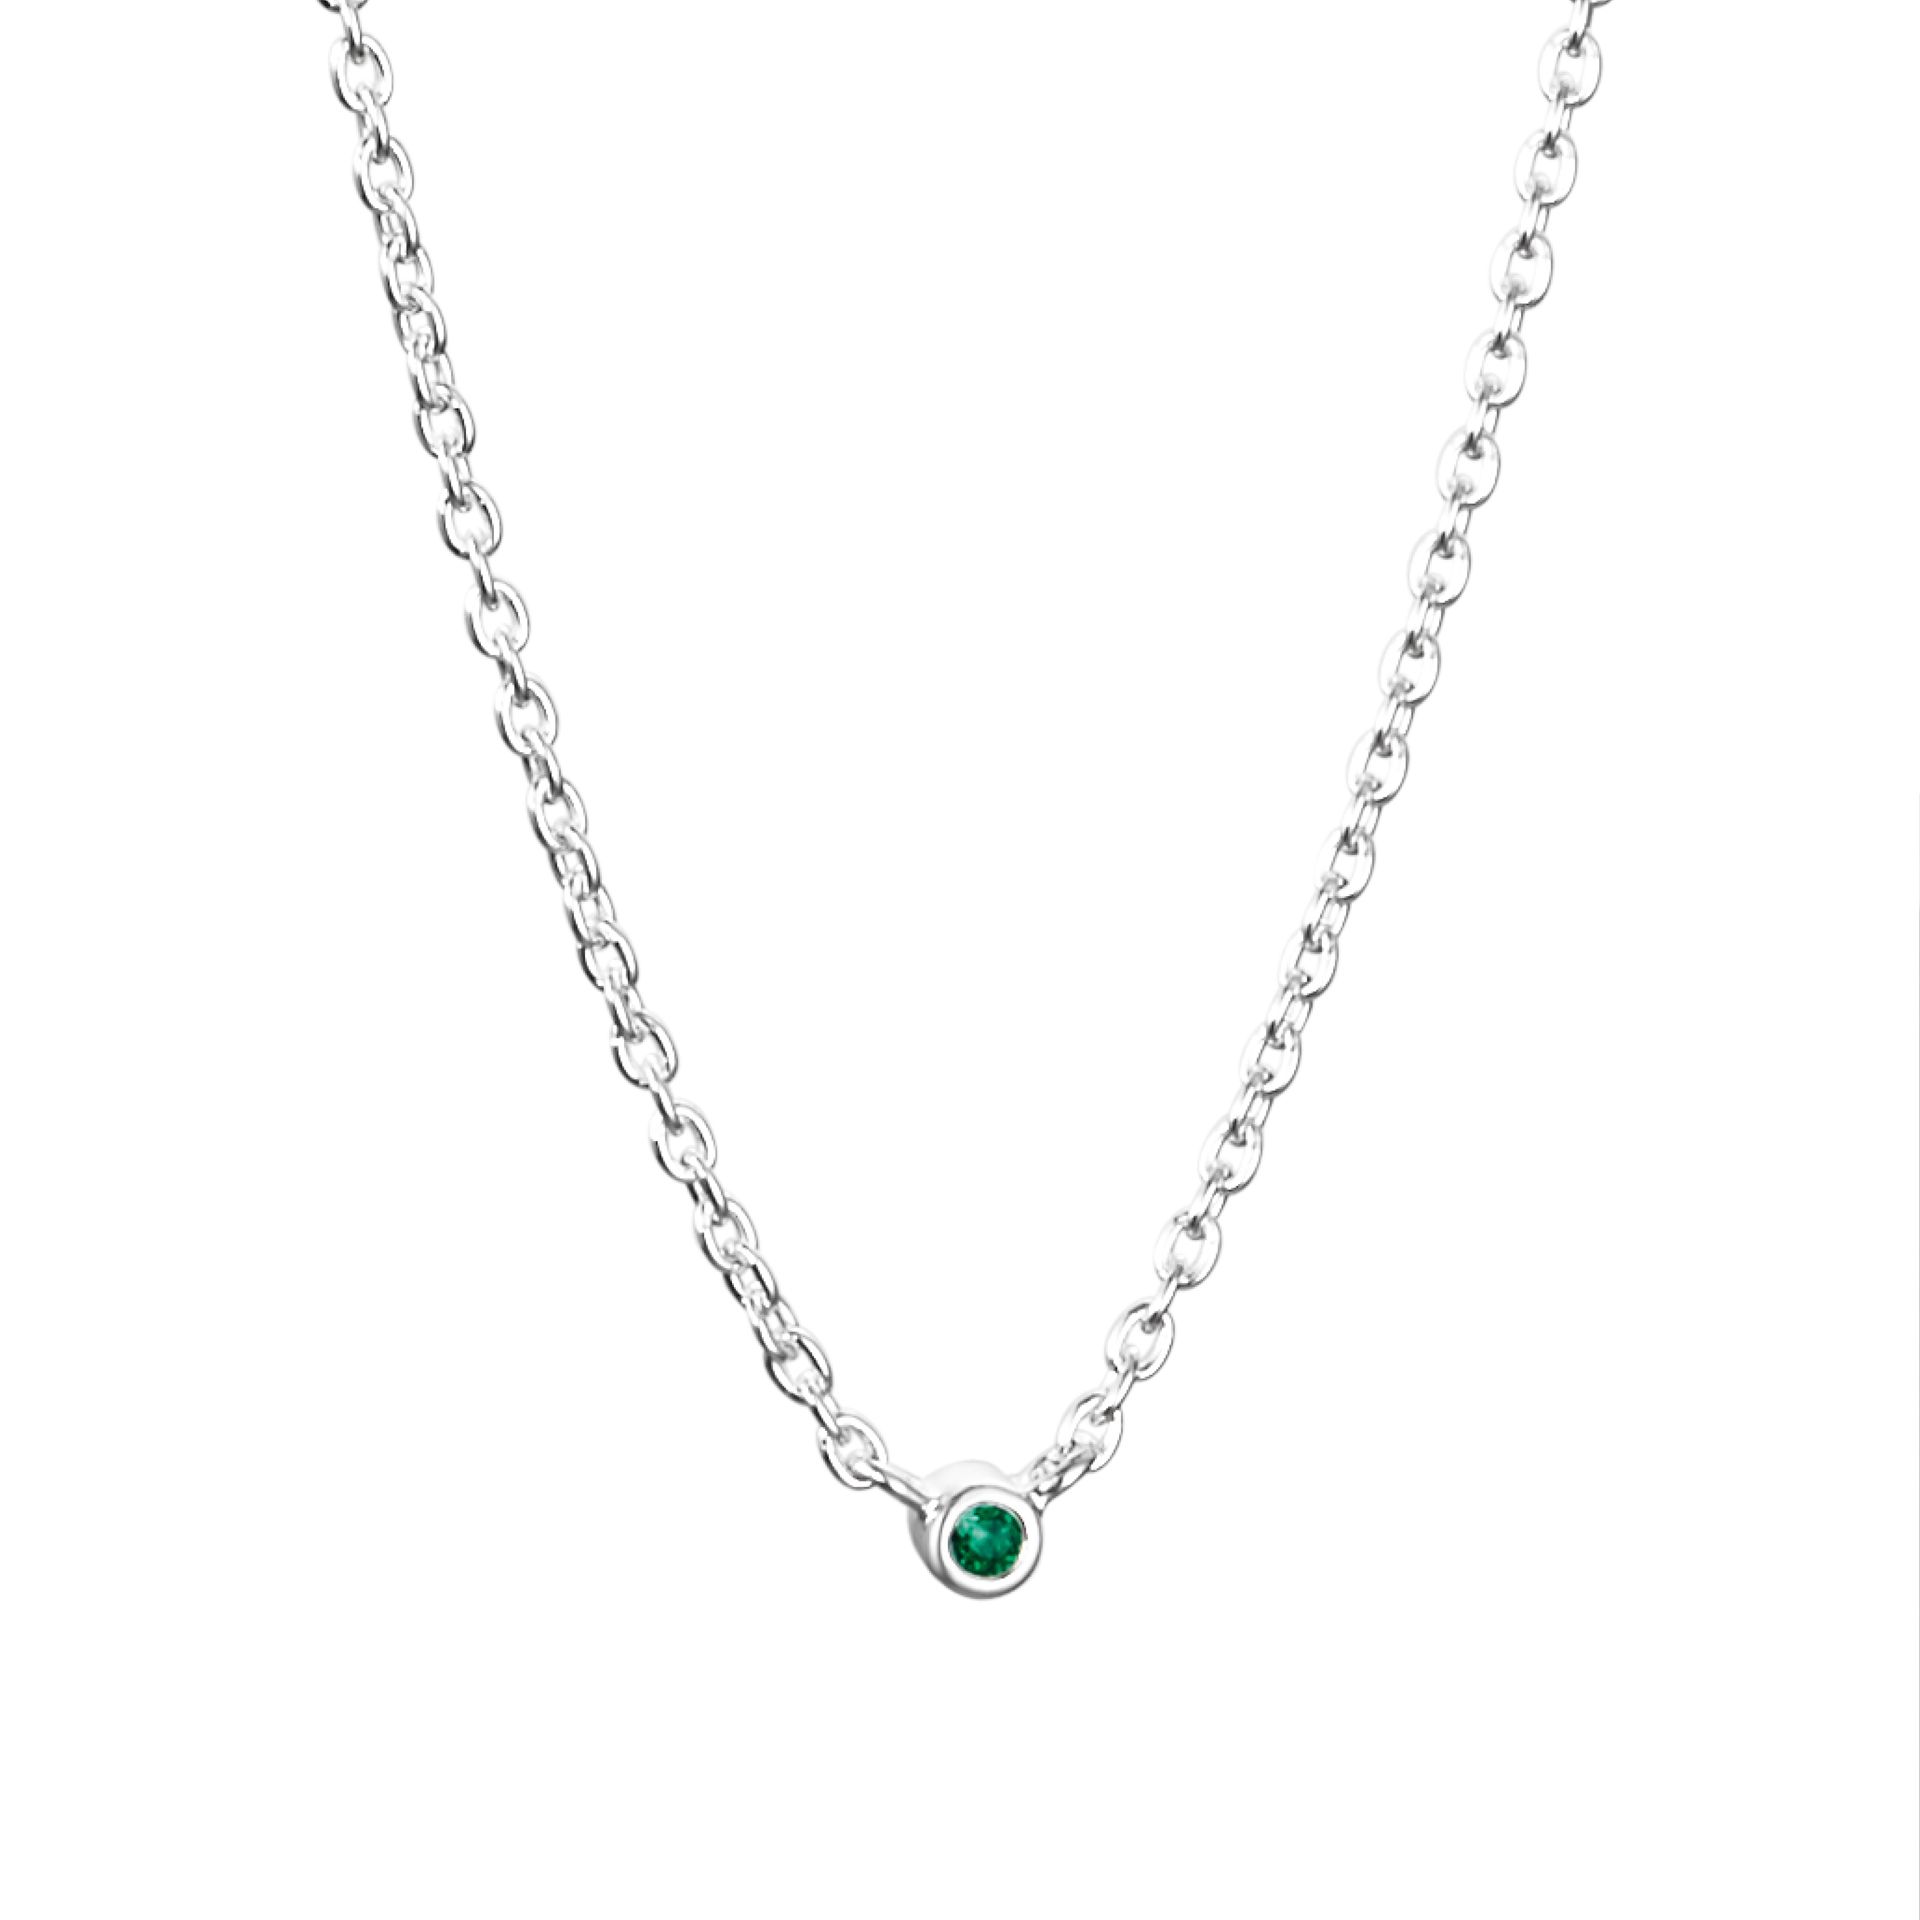 MICRO BLINK NECKLACE - GREEN EMERALD